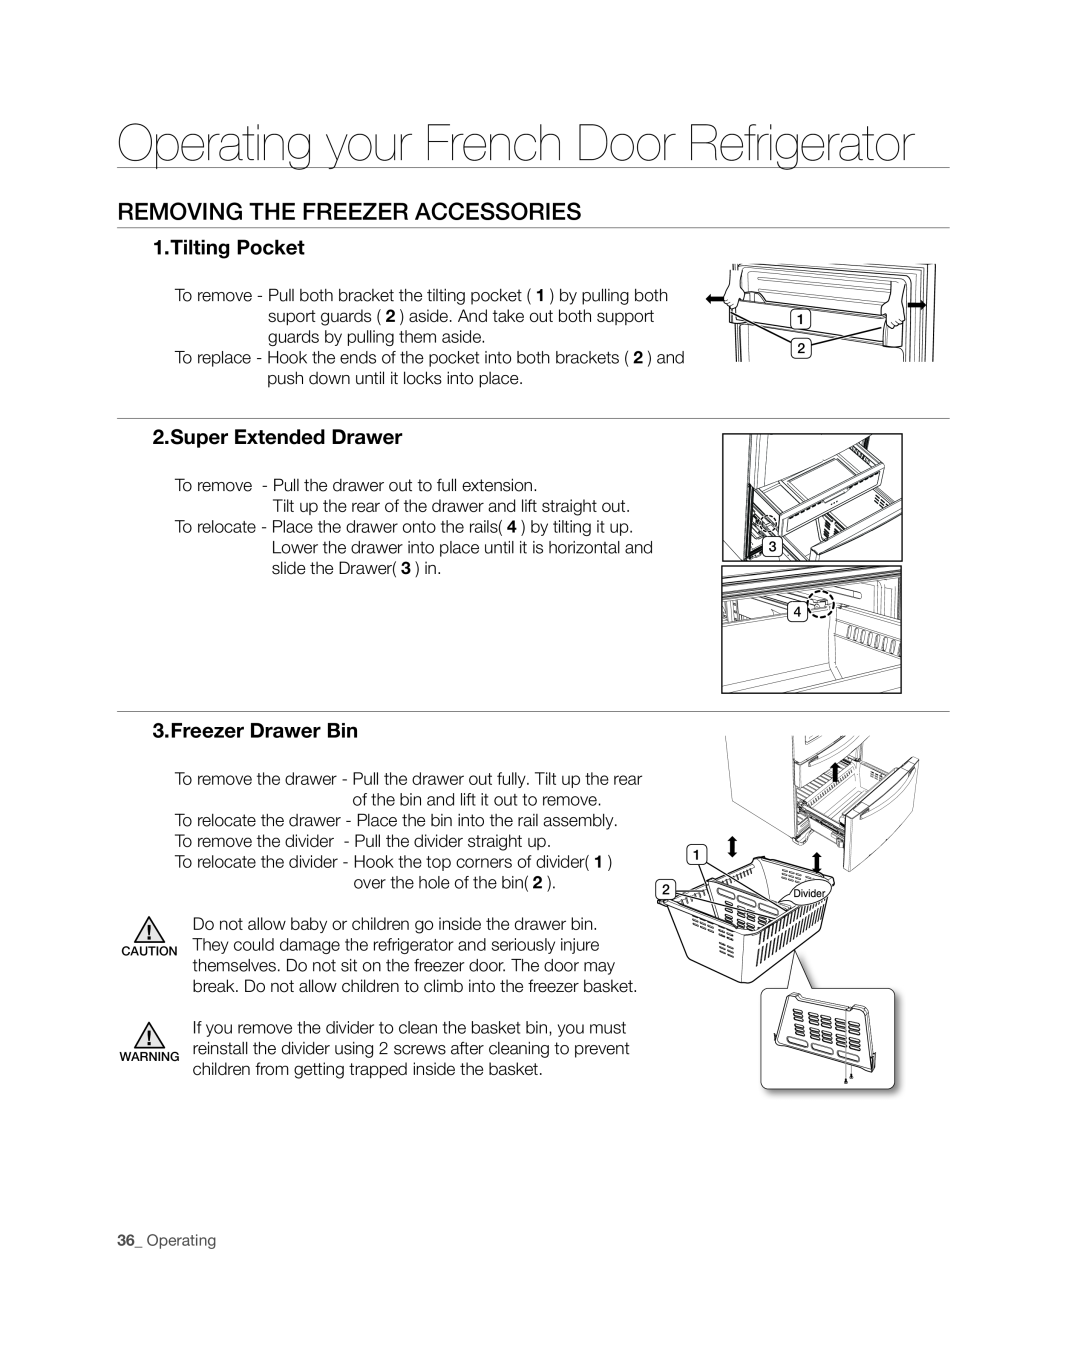 Samsung RF4287HA user manual Removing the freezer accessories, Operating your French Door Refrigerator, Tilting Pocket 